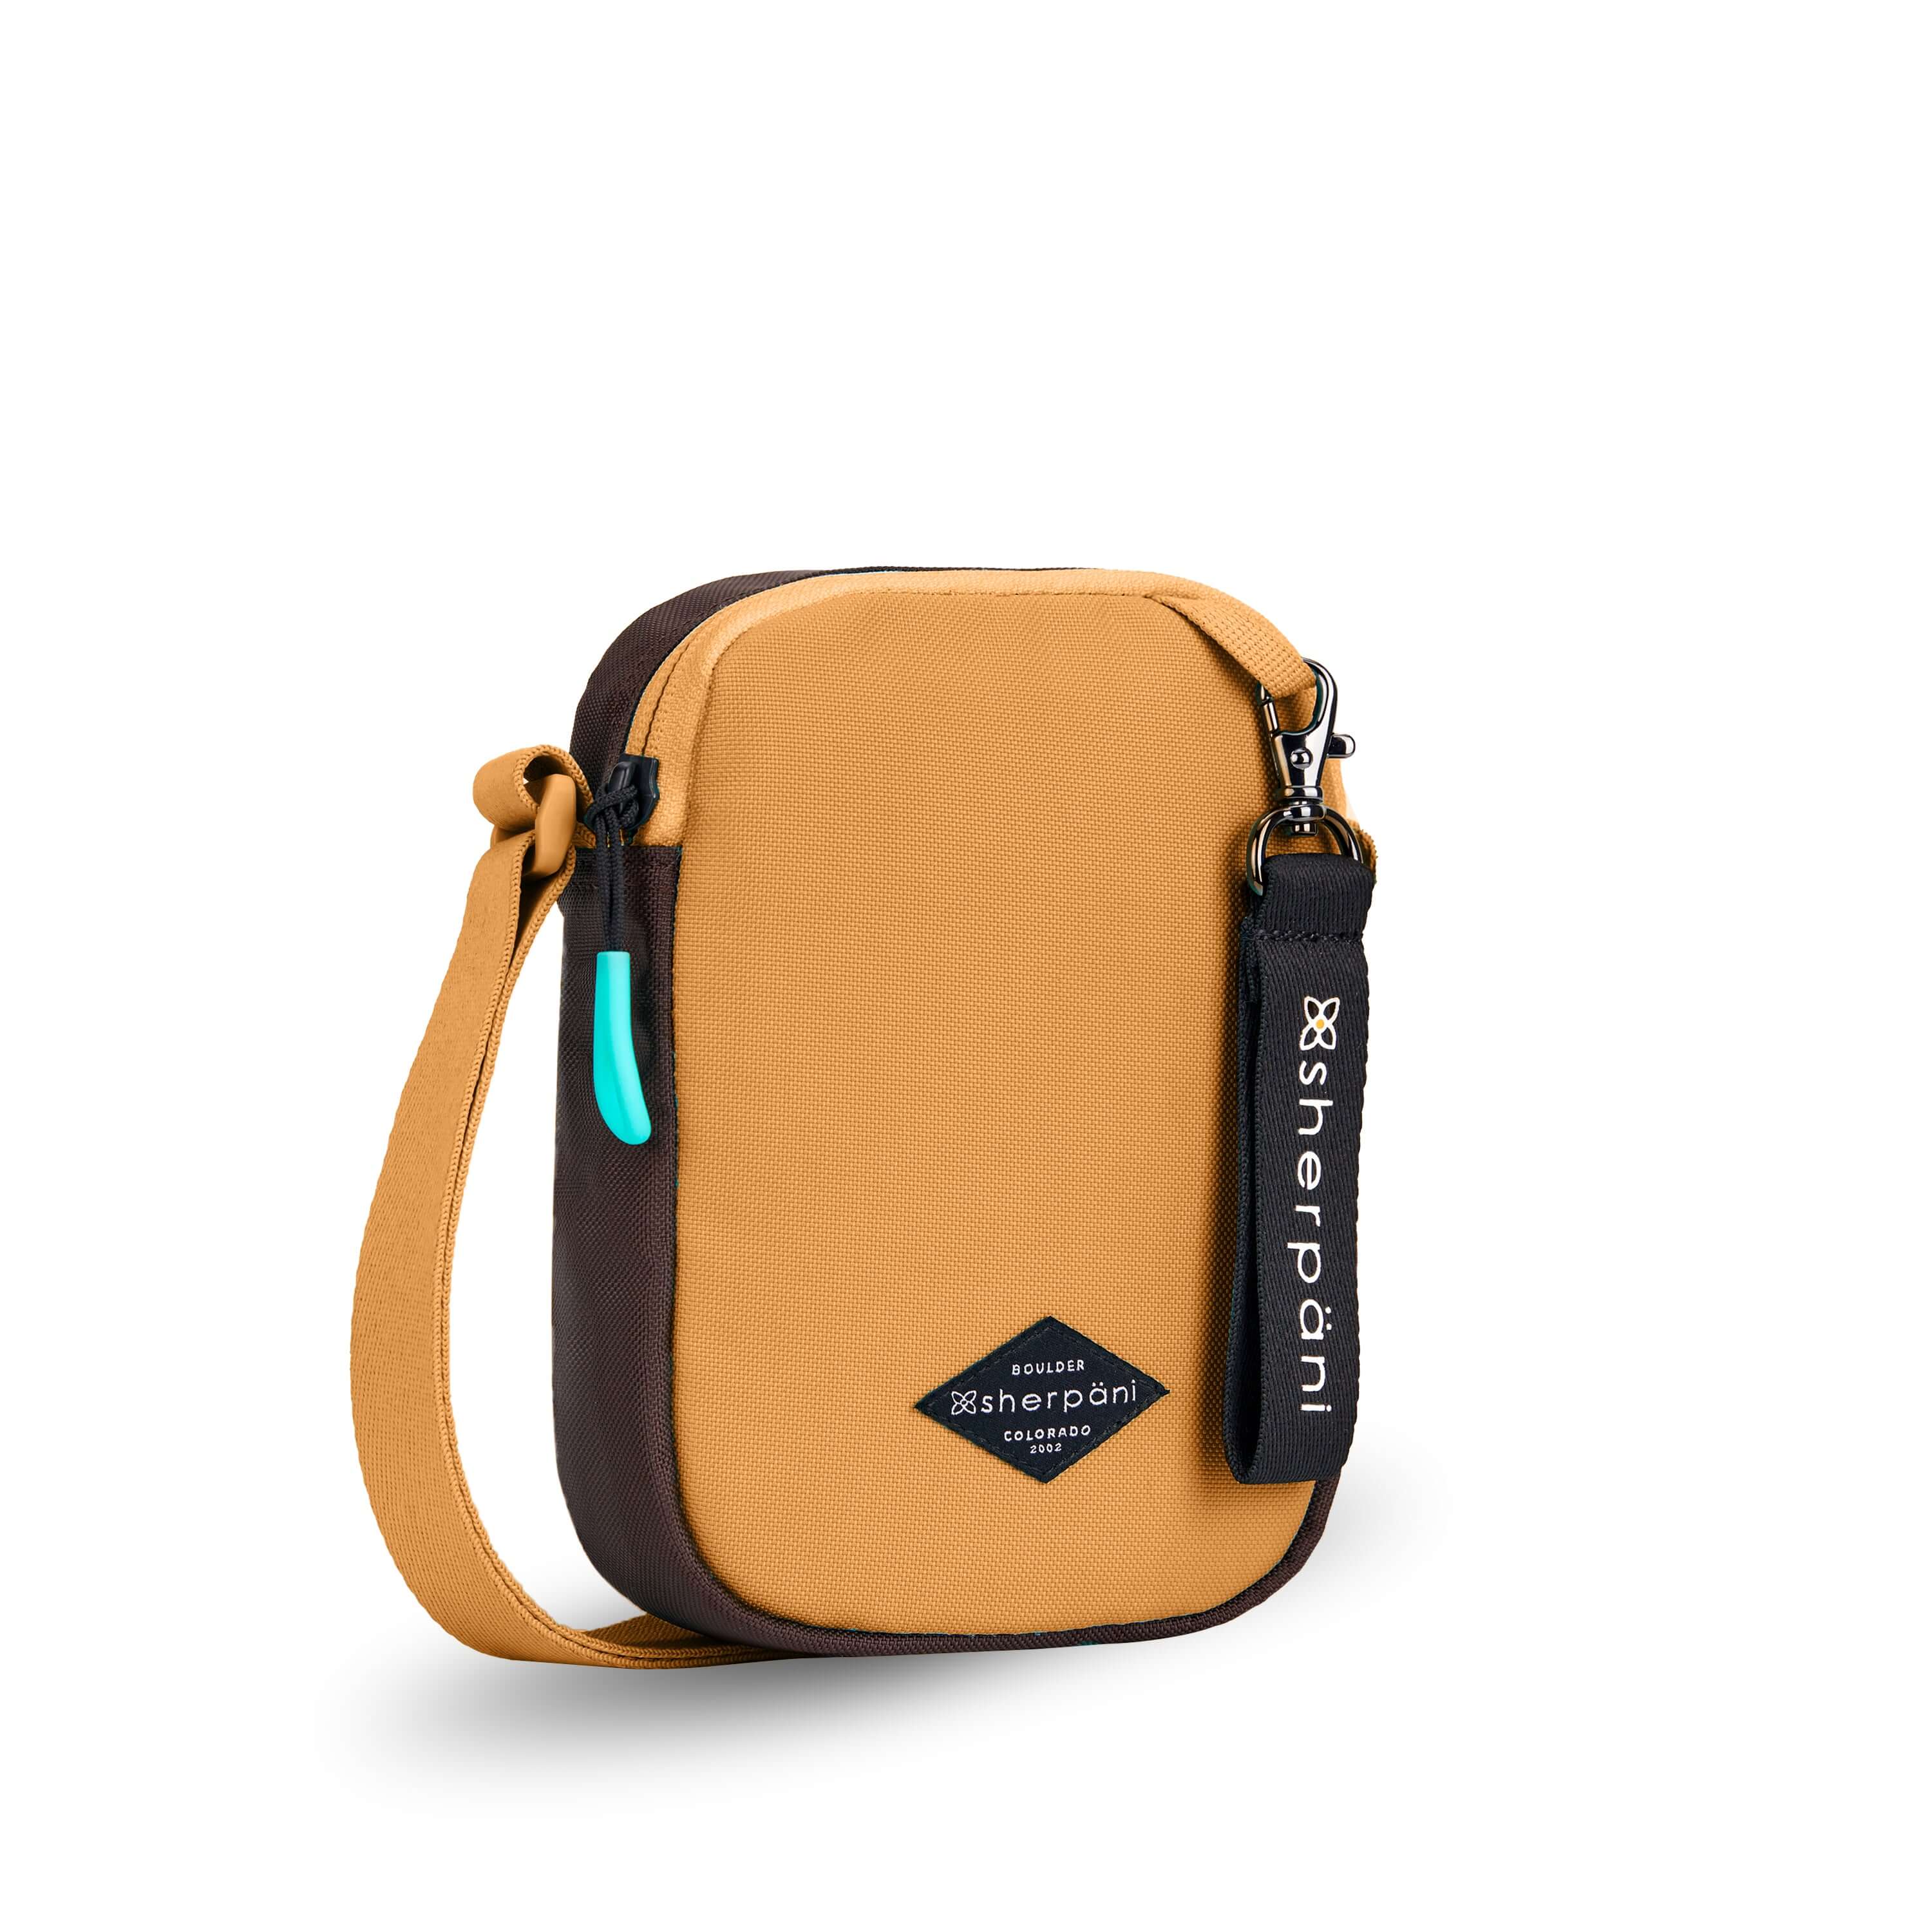 Angled front view of Sherpani crossbody, the Rogue in Sundial. The bag is two toned: the front is burnt yellow and the back is brown. The main zipper compartment features an easy-pull zipper accented in aqua. The bag has an adjustable crossbody strap. A branded Sherpani keychain is clipped to a fabric loop on the top right corner.